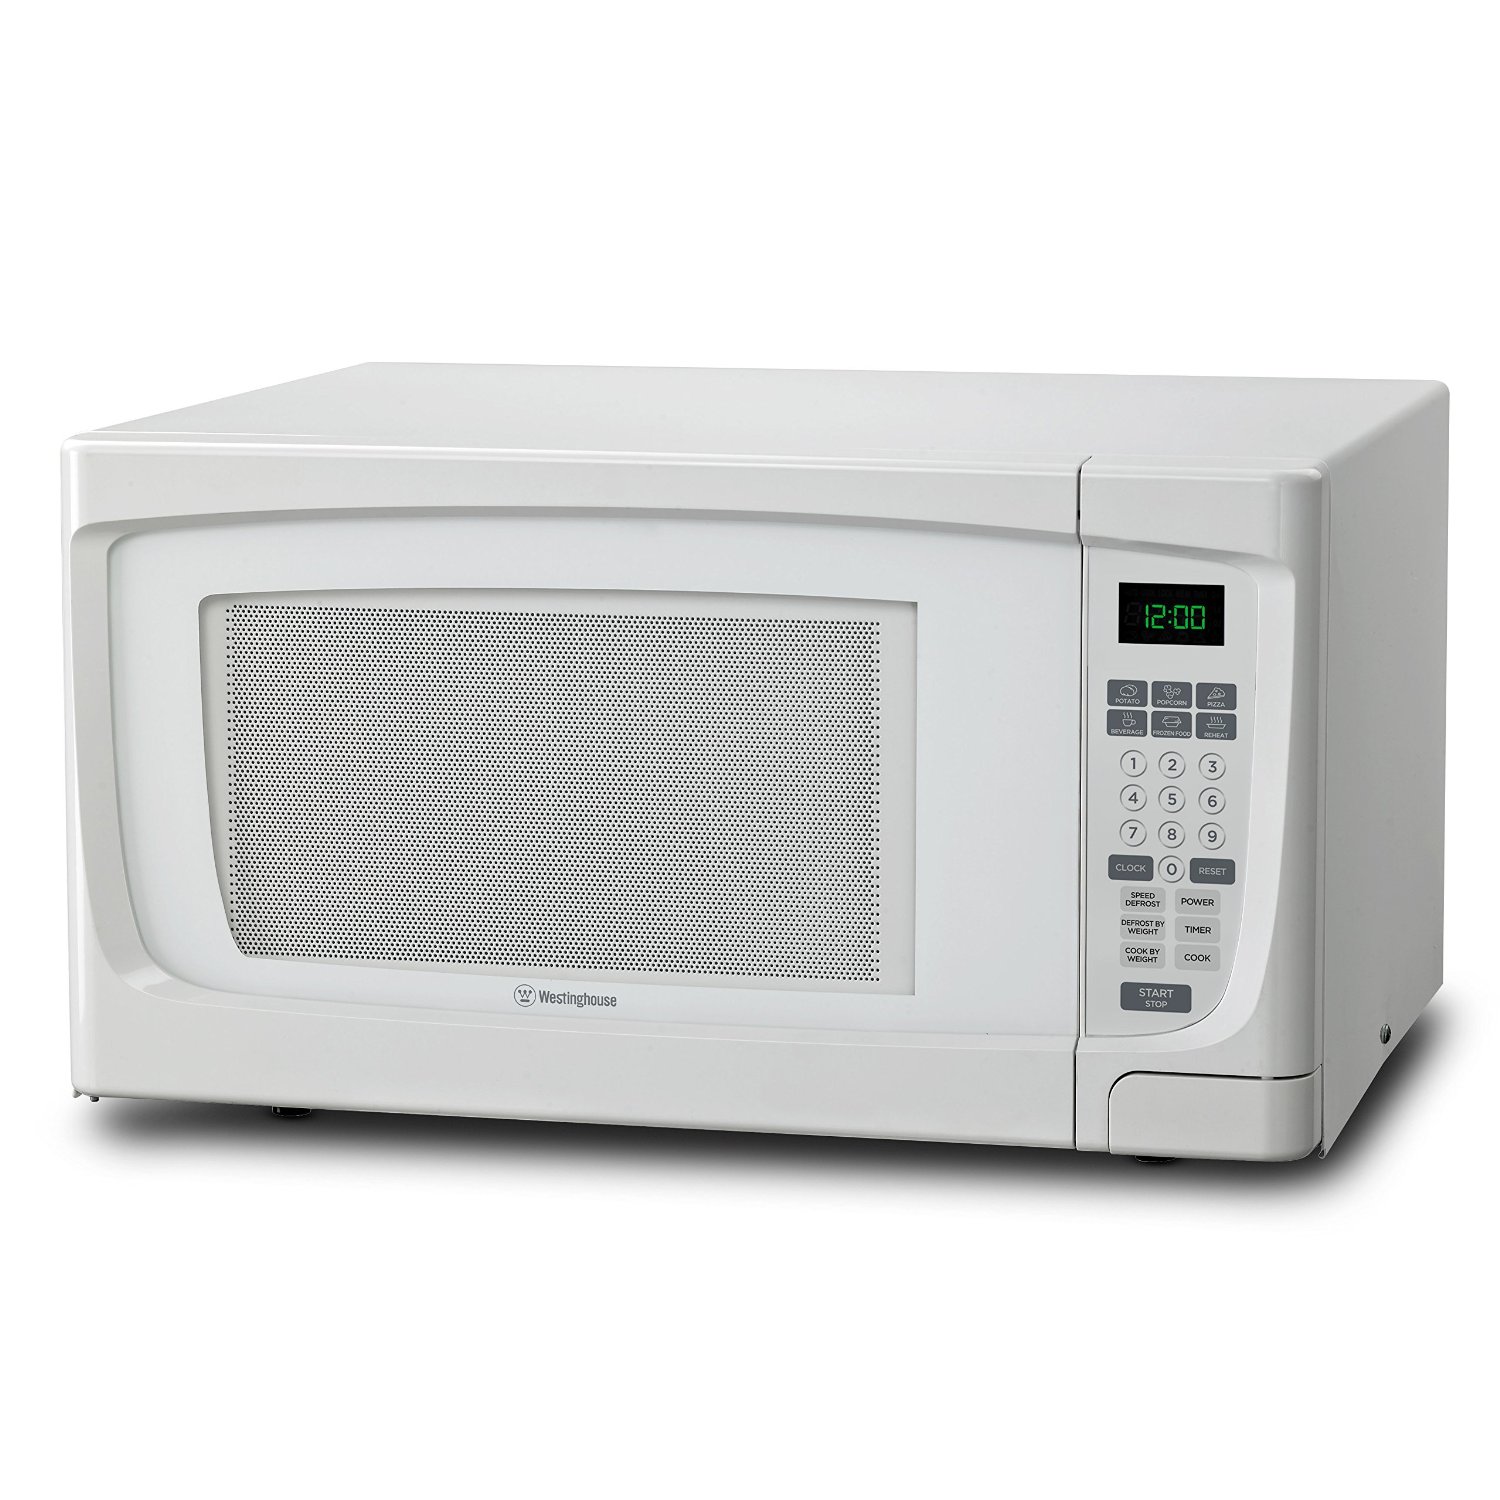 Westinghouse WCM16100W 1000 Watt Counter Top Microwave Oven, 1.6 Cubic